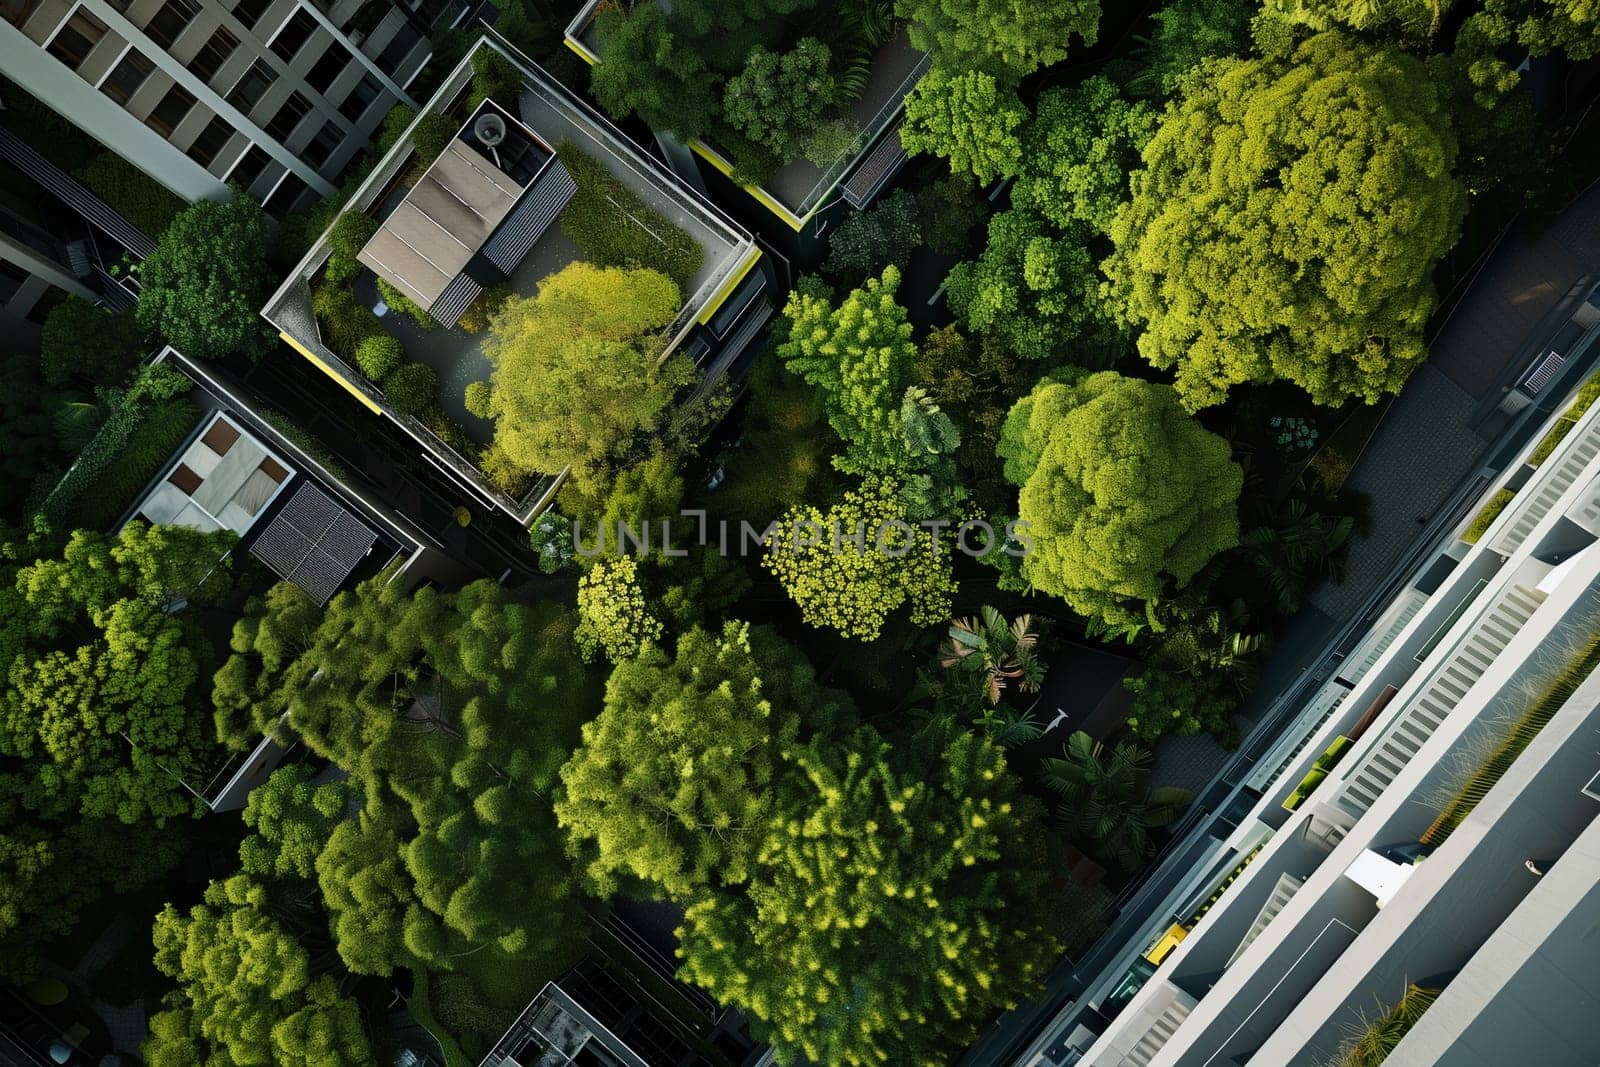 An aerial perspective of a park filled with numerous trees, showcasing a dense green canopy and lush vegetation.